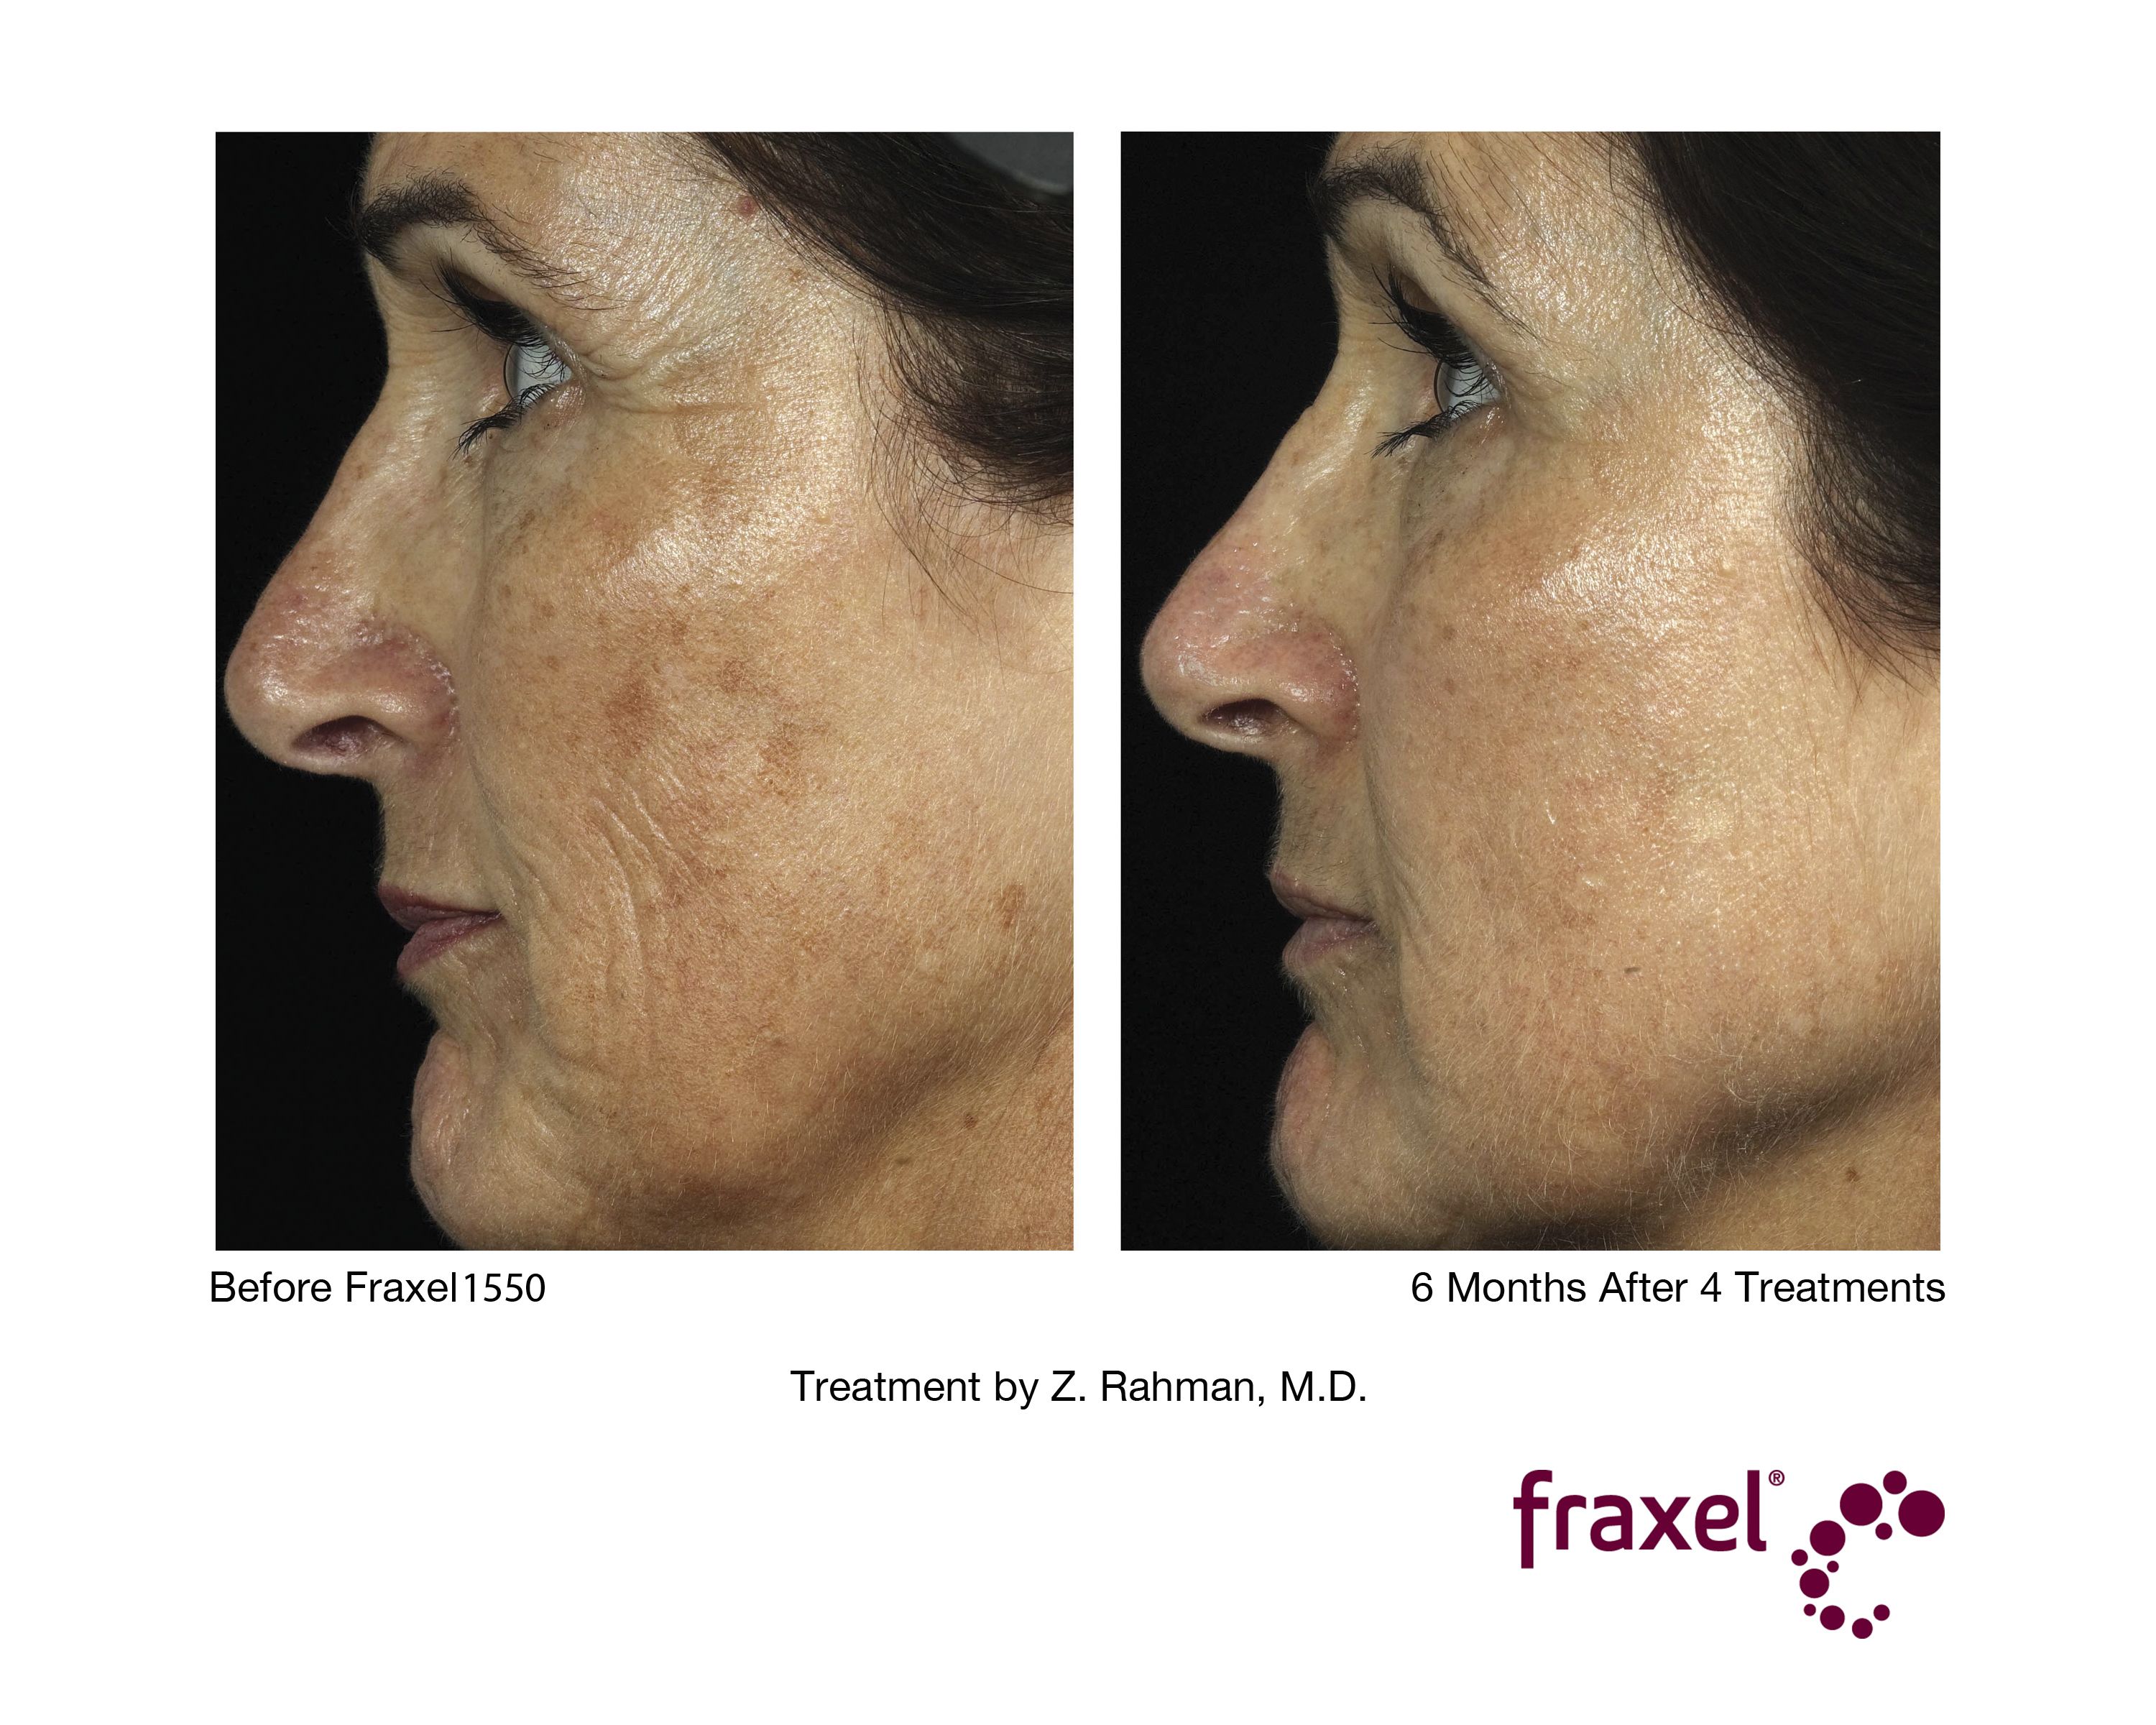 6 Months After 4 Fraxel Treatments